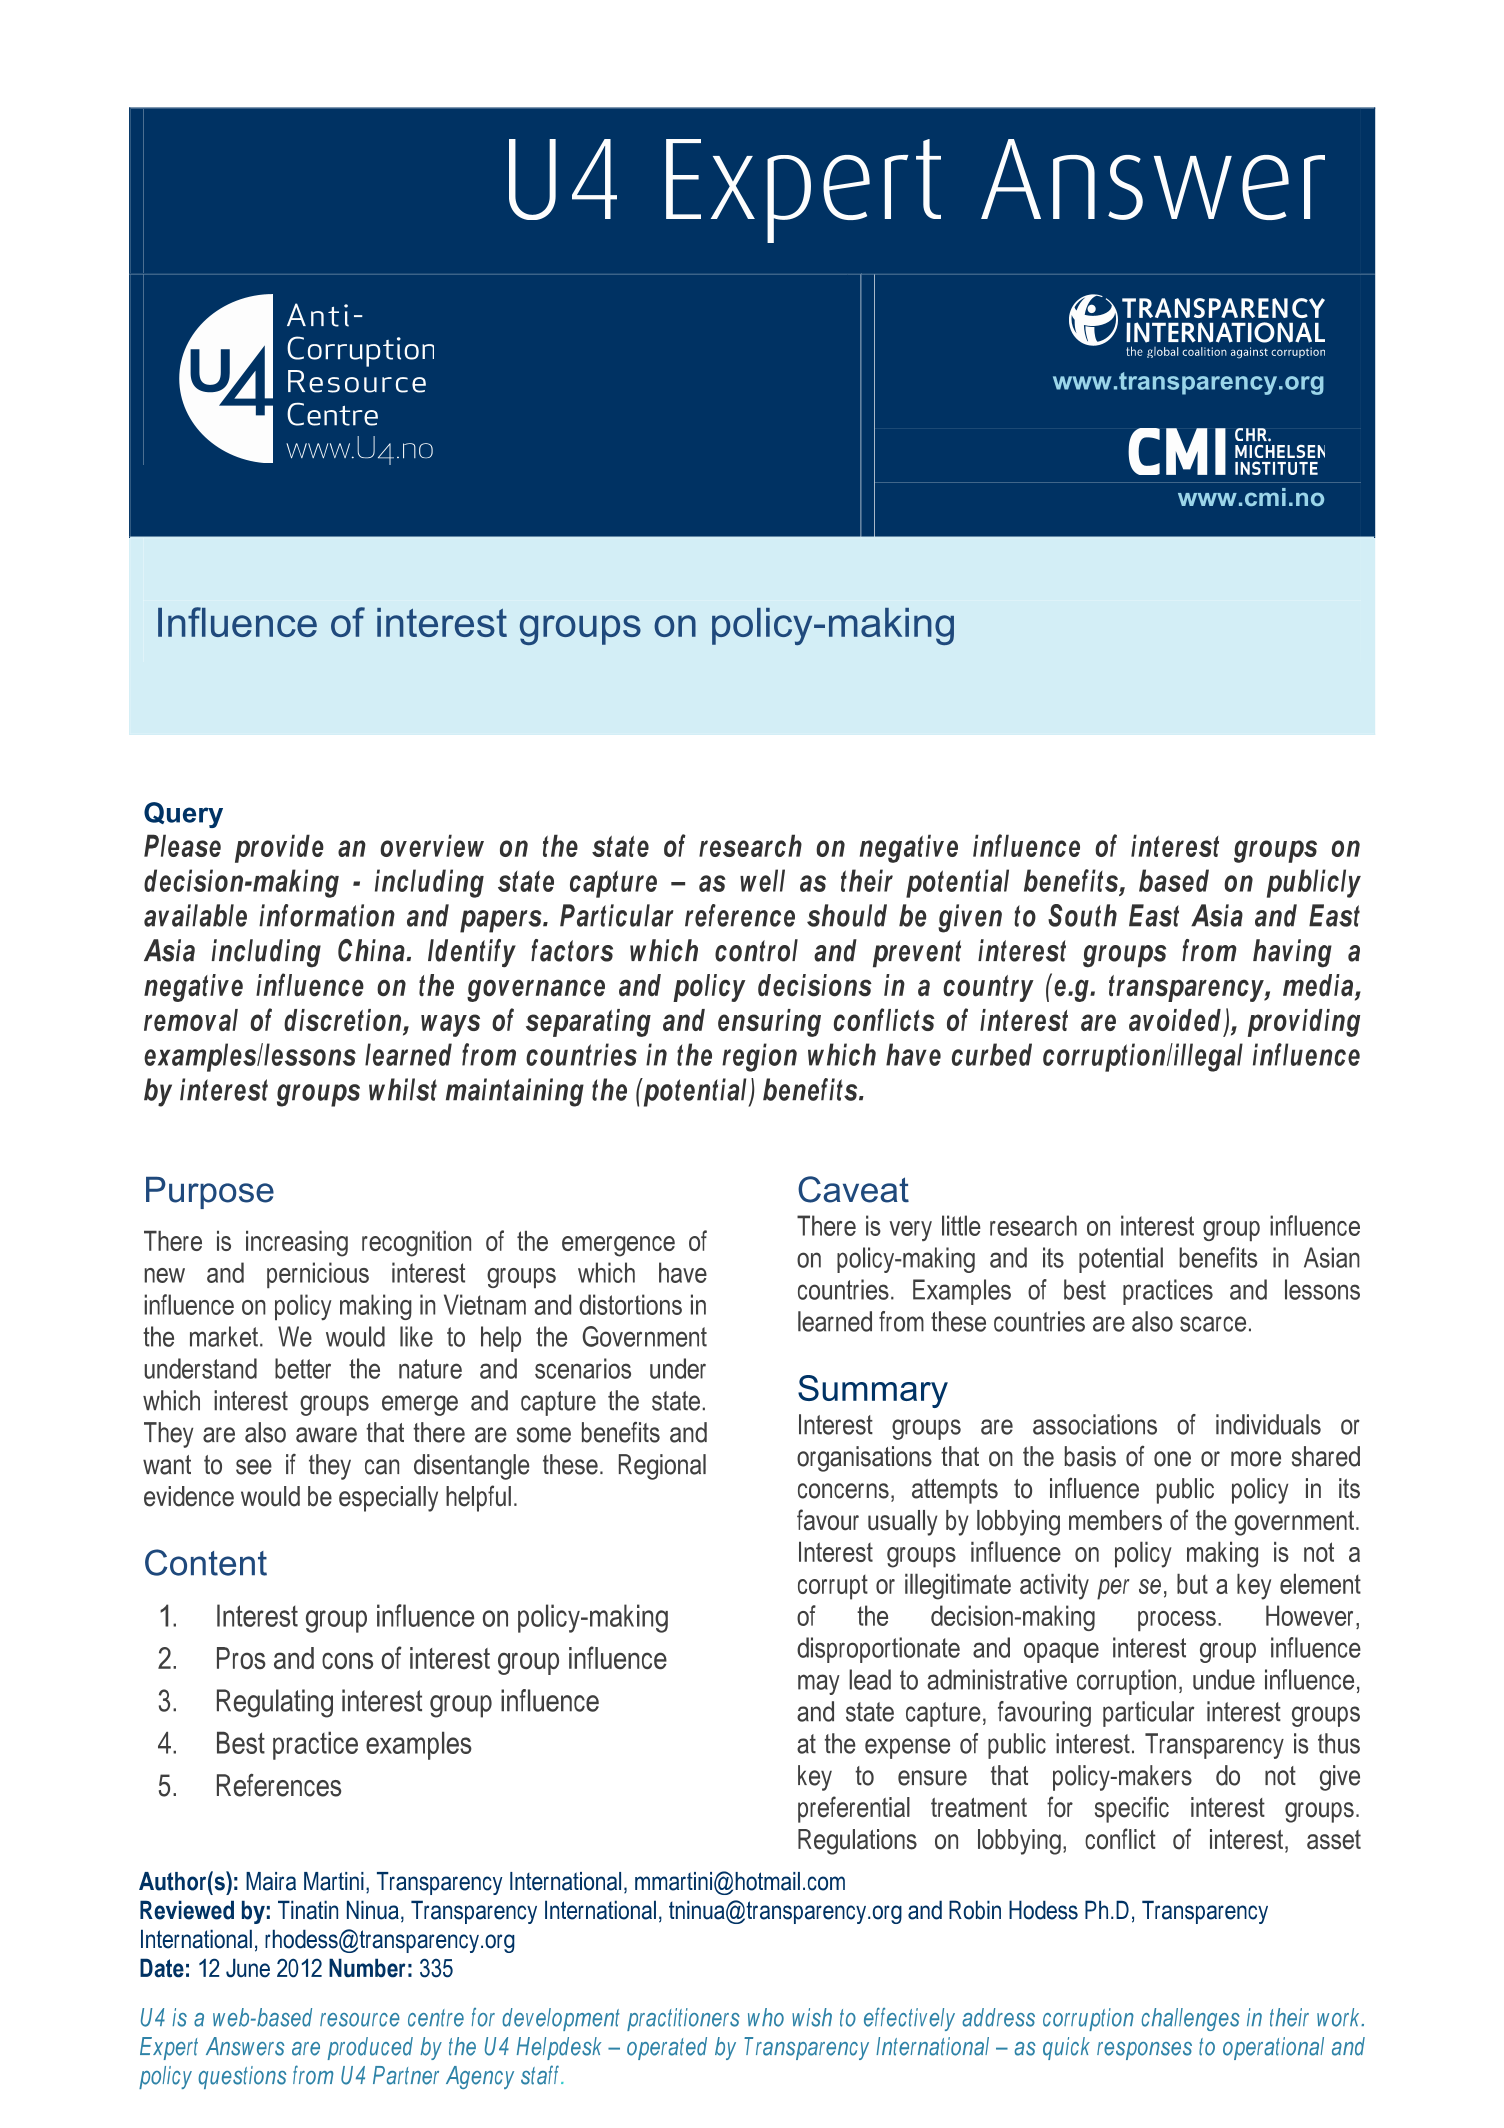 Influence of interest groups on policy-making